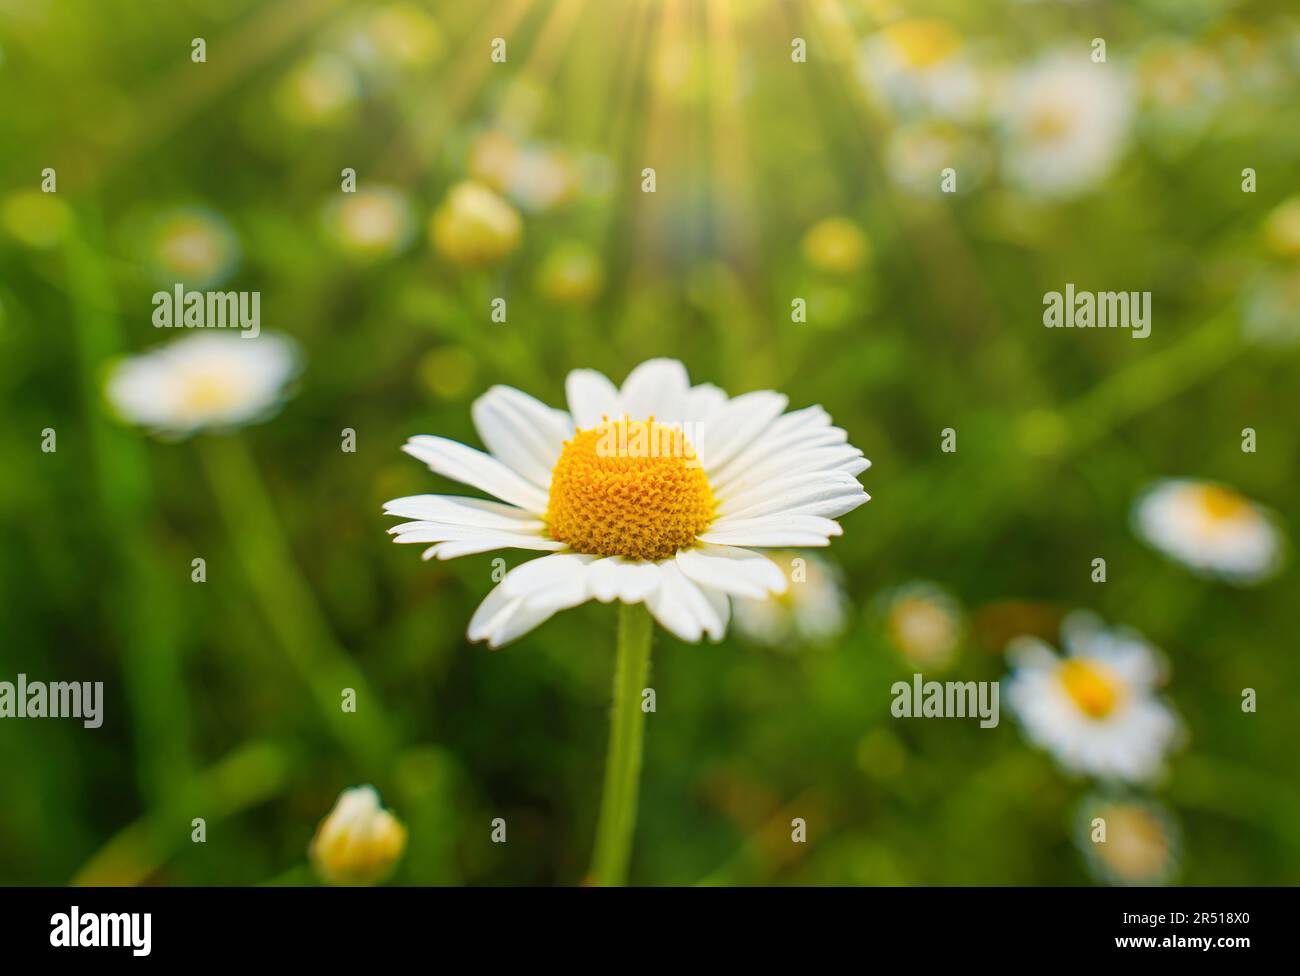 Сlose-up of a vibrant blooming daisy in a field, illuminated by rays of sunlight. Purity, innocence and simplicity concept. Stock Photo